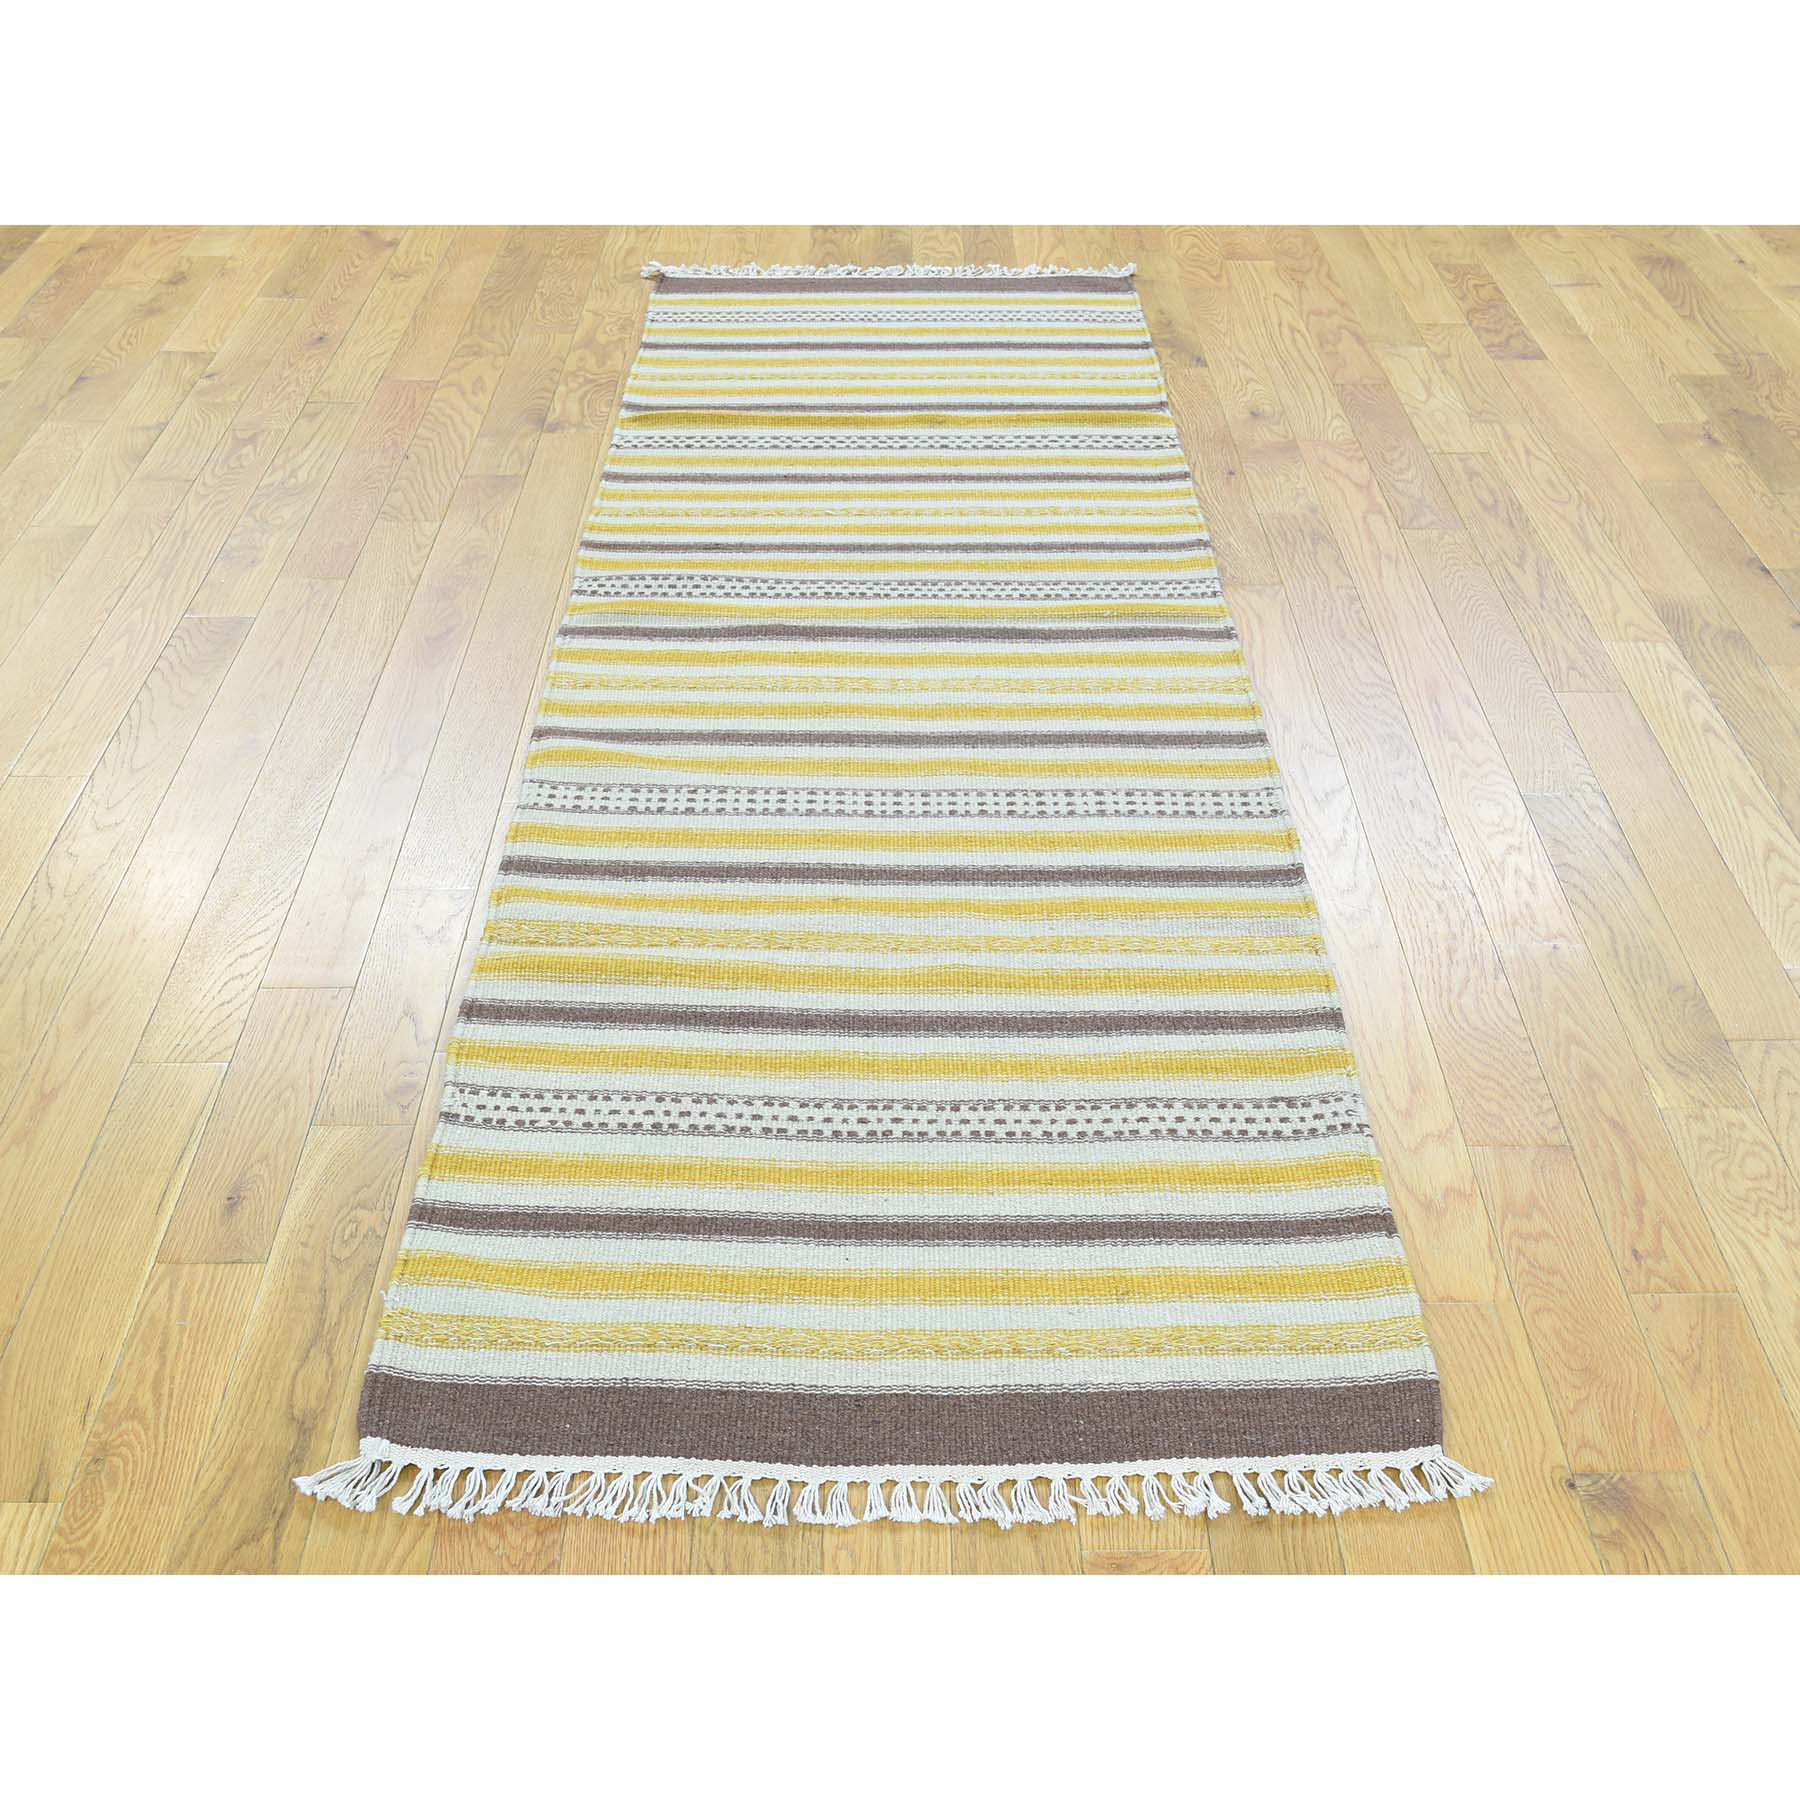 2 5 X8 Hand Woven Pure Wool Flat Weave Striped Durie Kilim Runner Rug